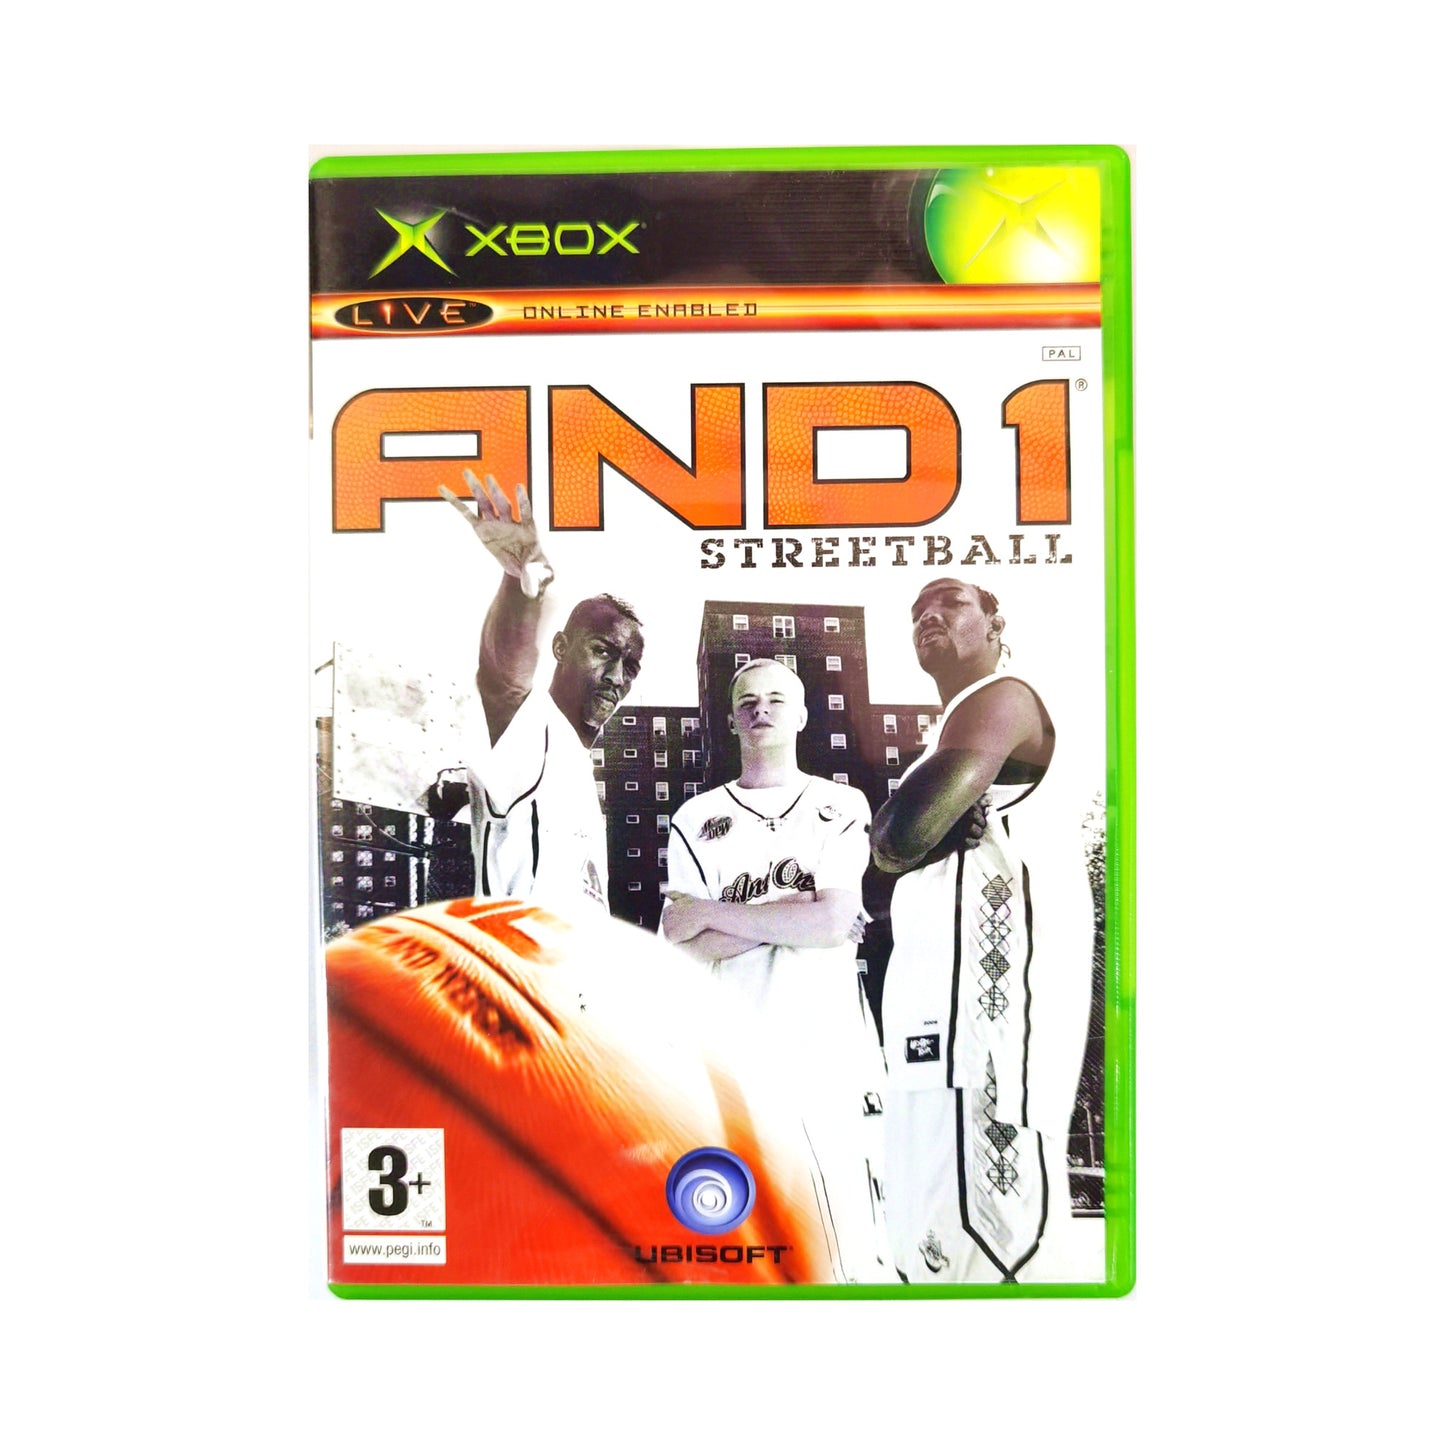 AND1 Streetball - XBOX